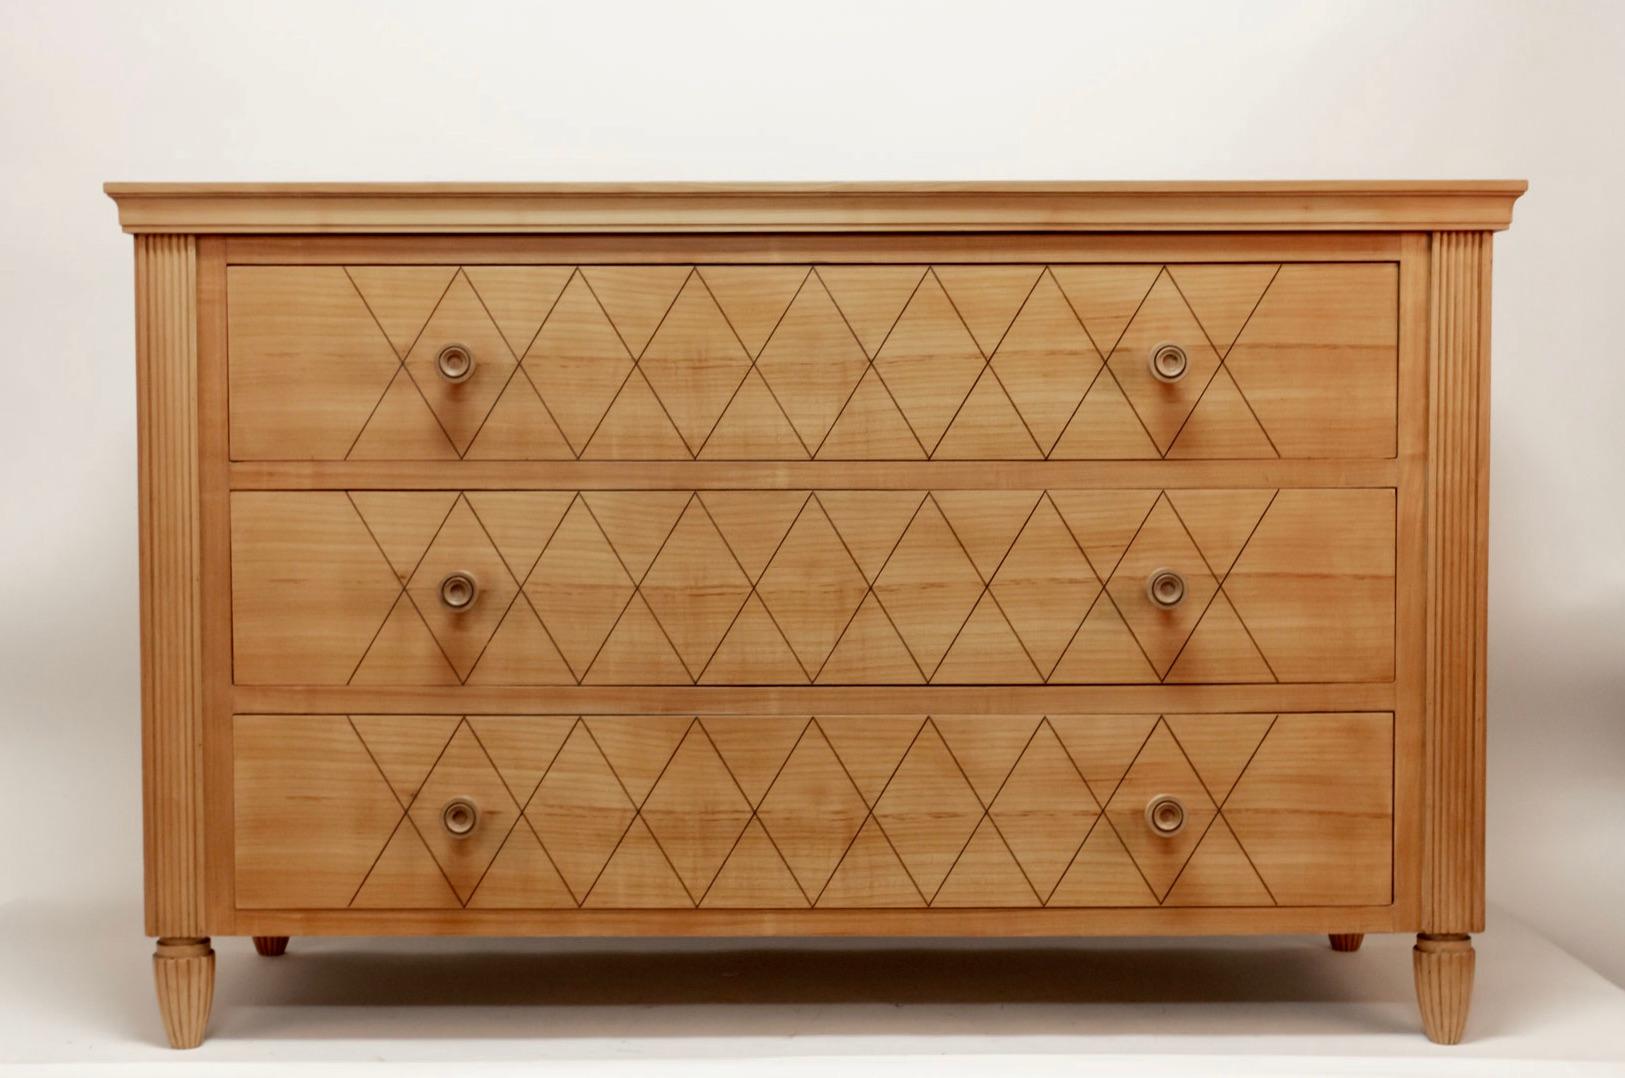 Elegant French commode or chest of drawers made of cherrywood and oak, circa 1940.
High woodworking quality, dovetail joints and turned wood handles.
The three drawers are adorned with a diamond pattern. The four corners are fluted as well as the